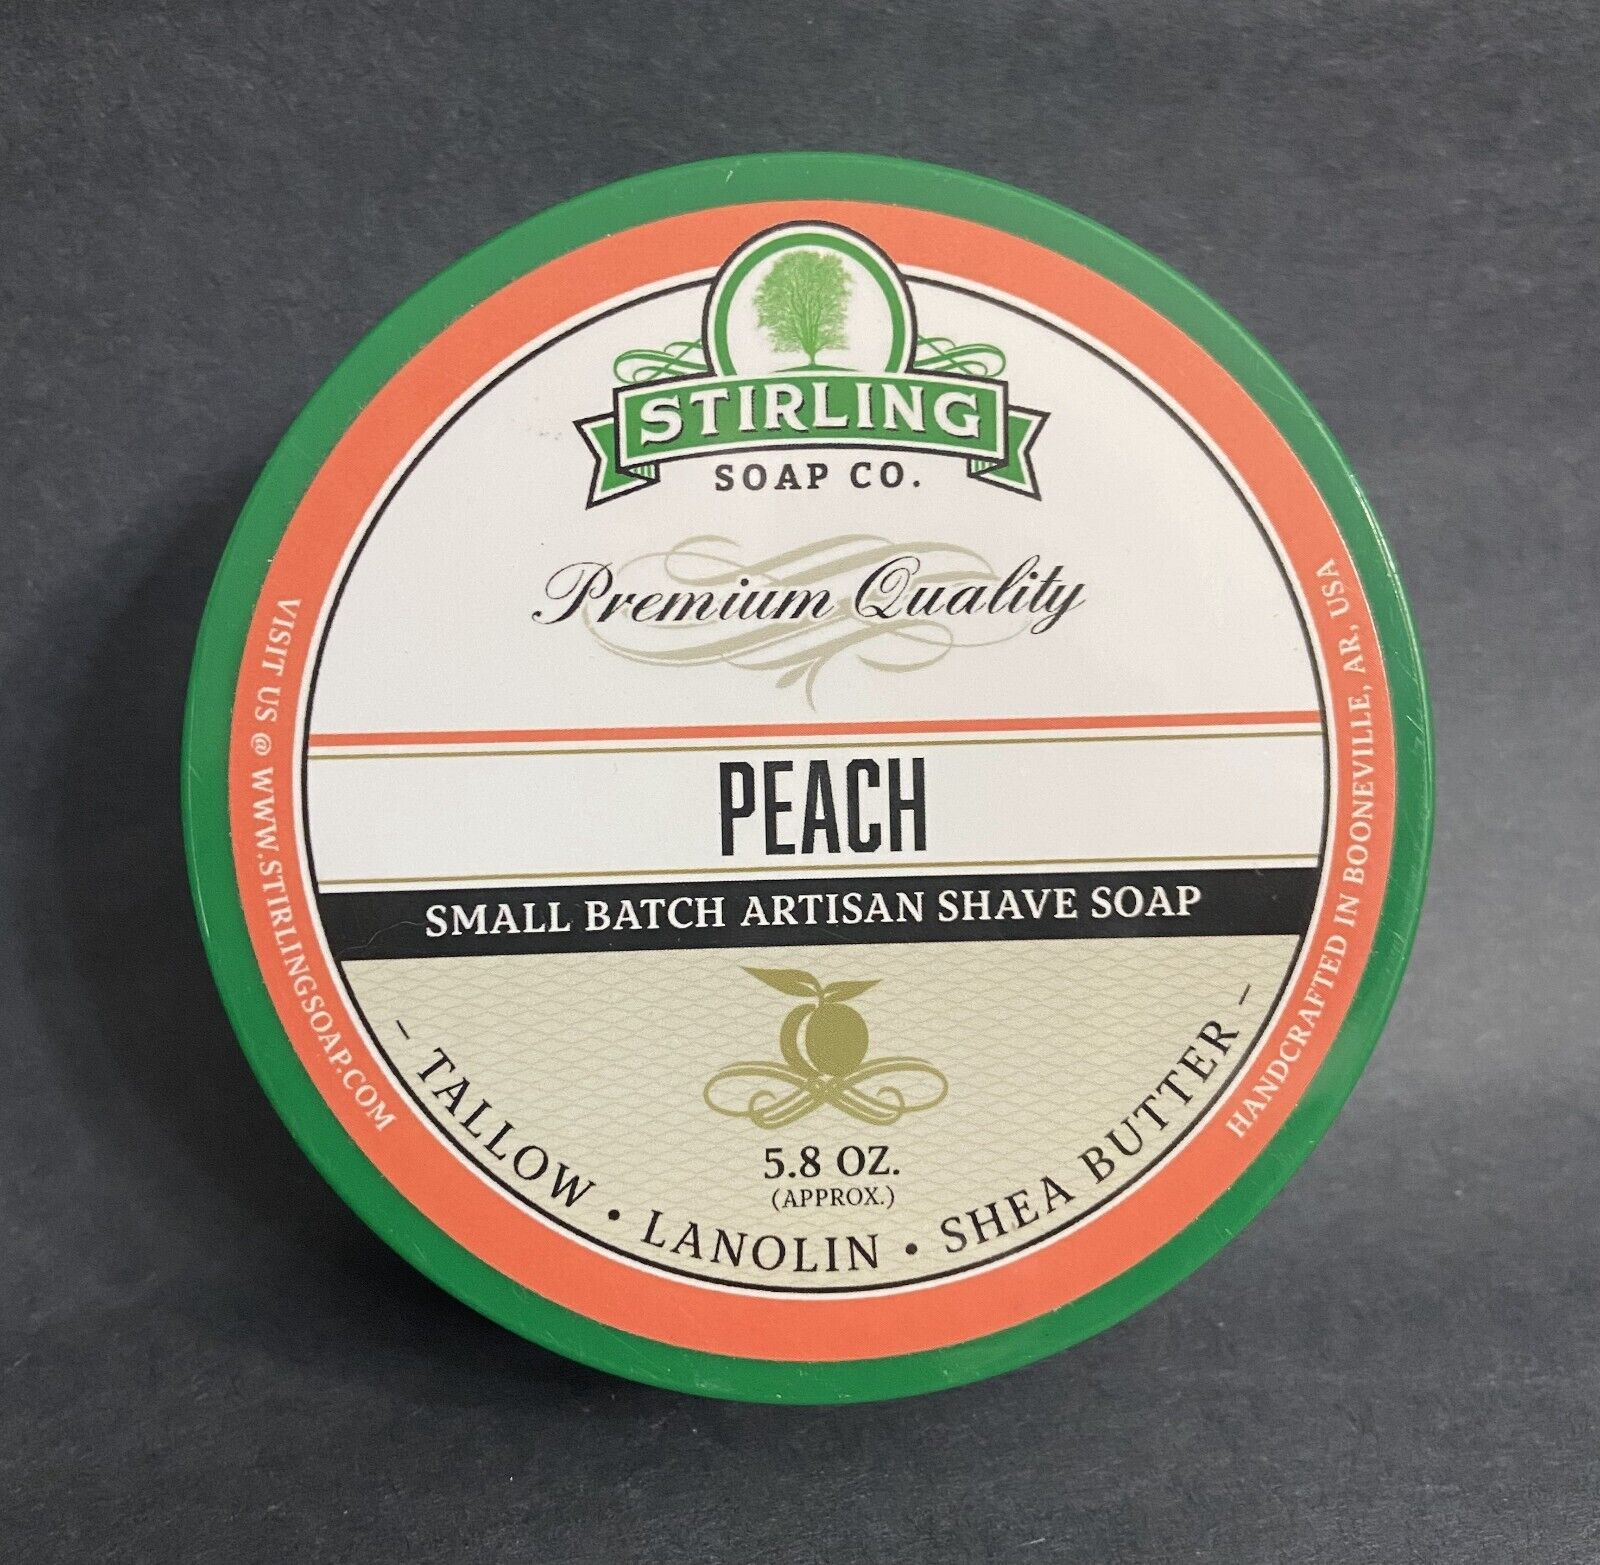 Stirling Soap PEACH shave soap (previously owned)